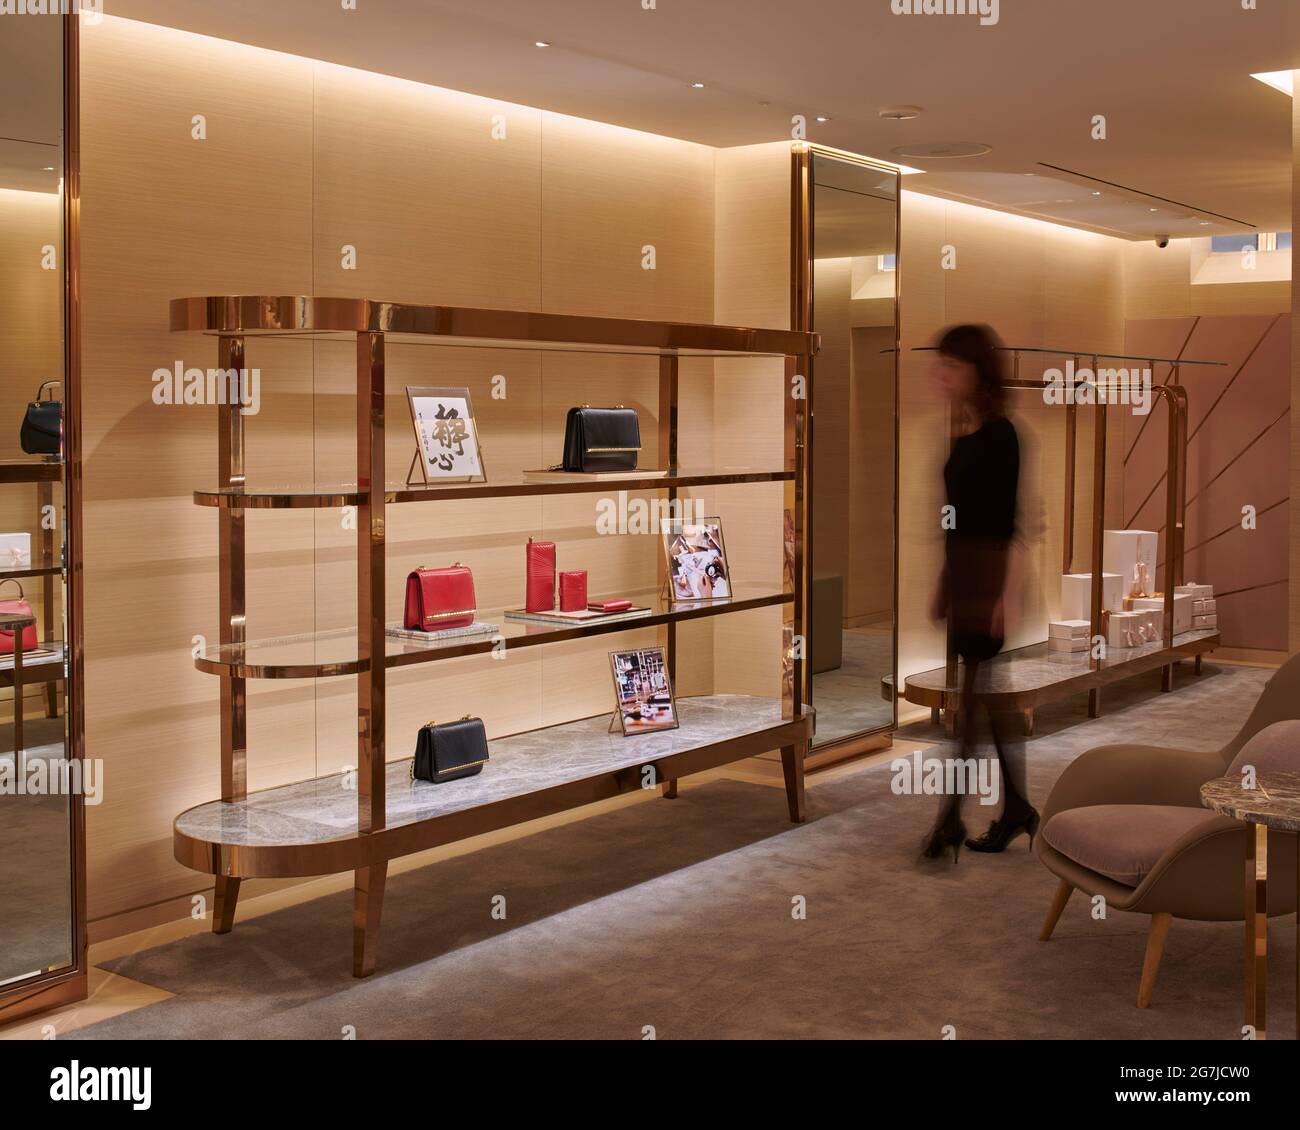 Louis vuitton shop florence tuscany hi-res stock photography and images -  Alamy